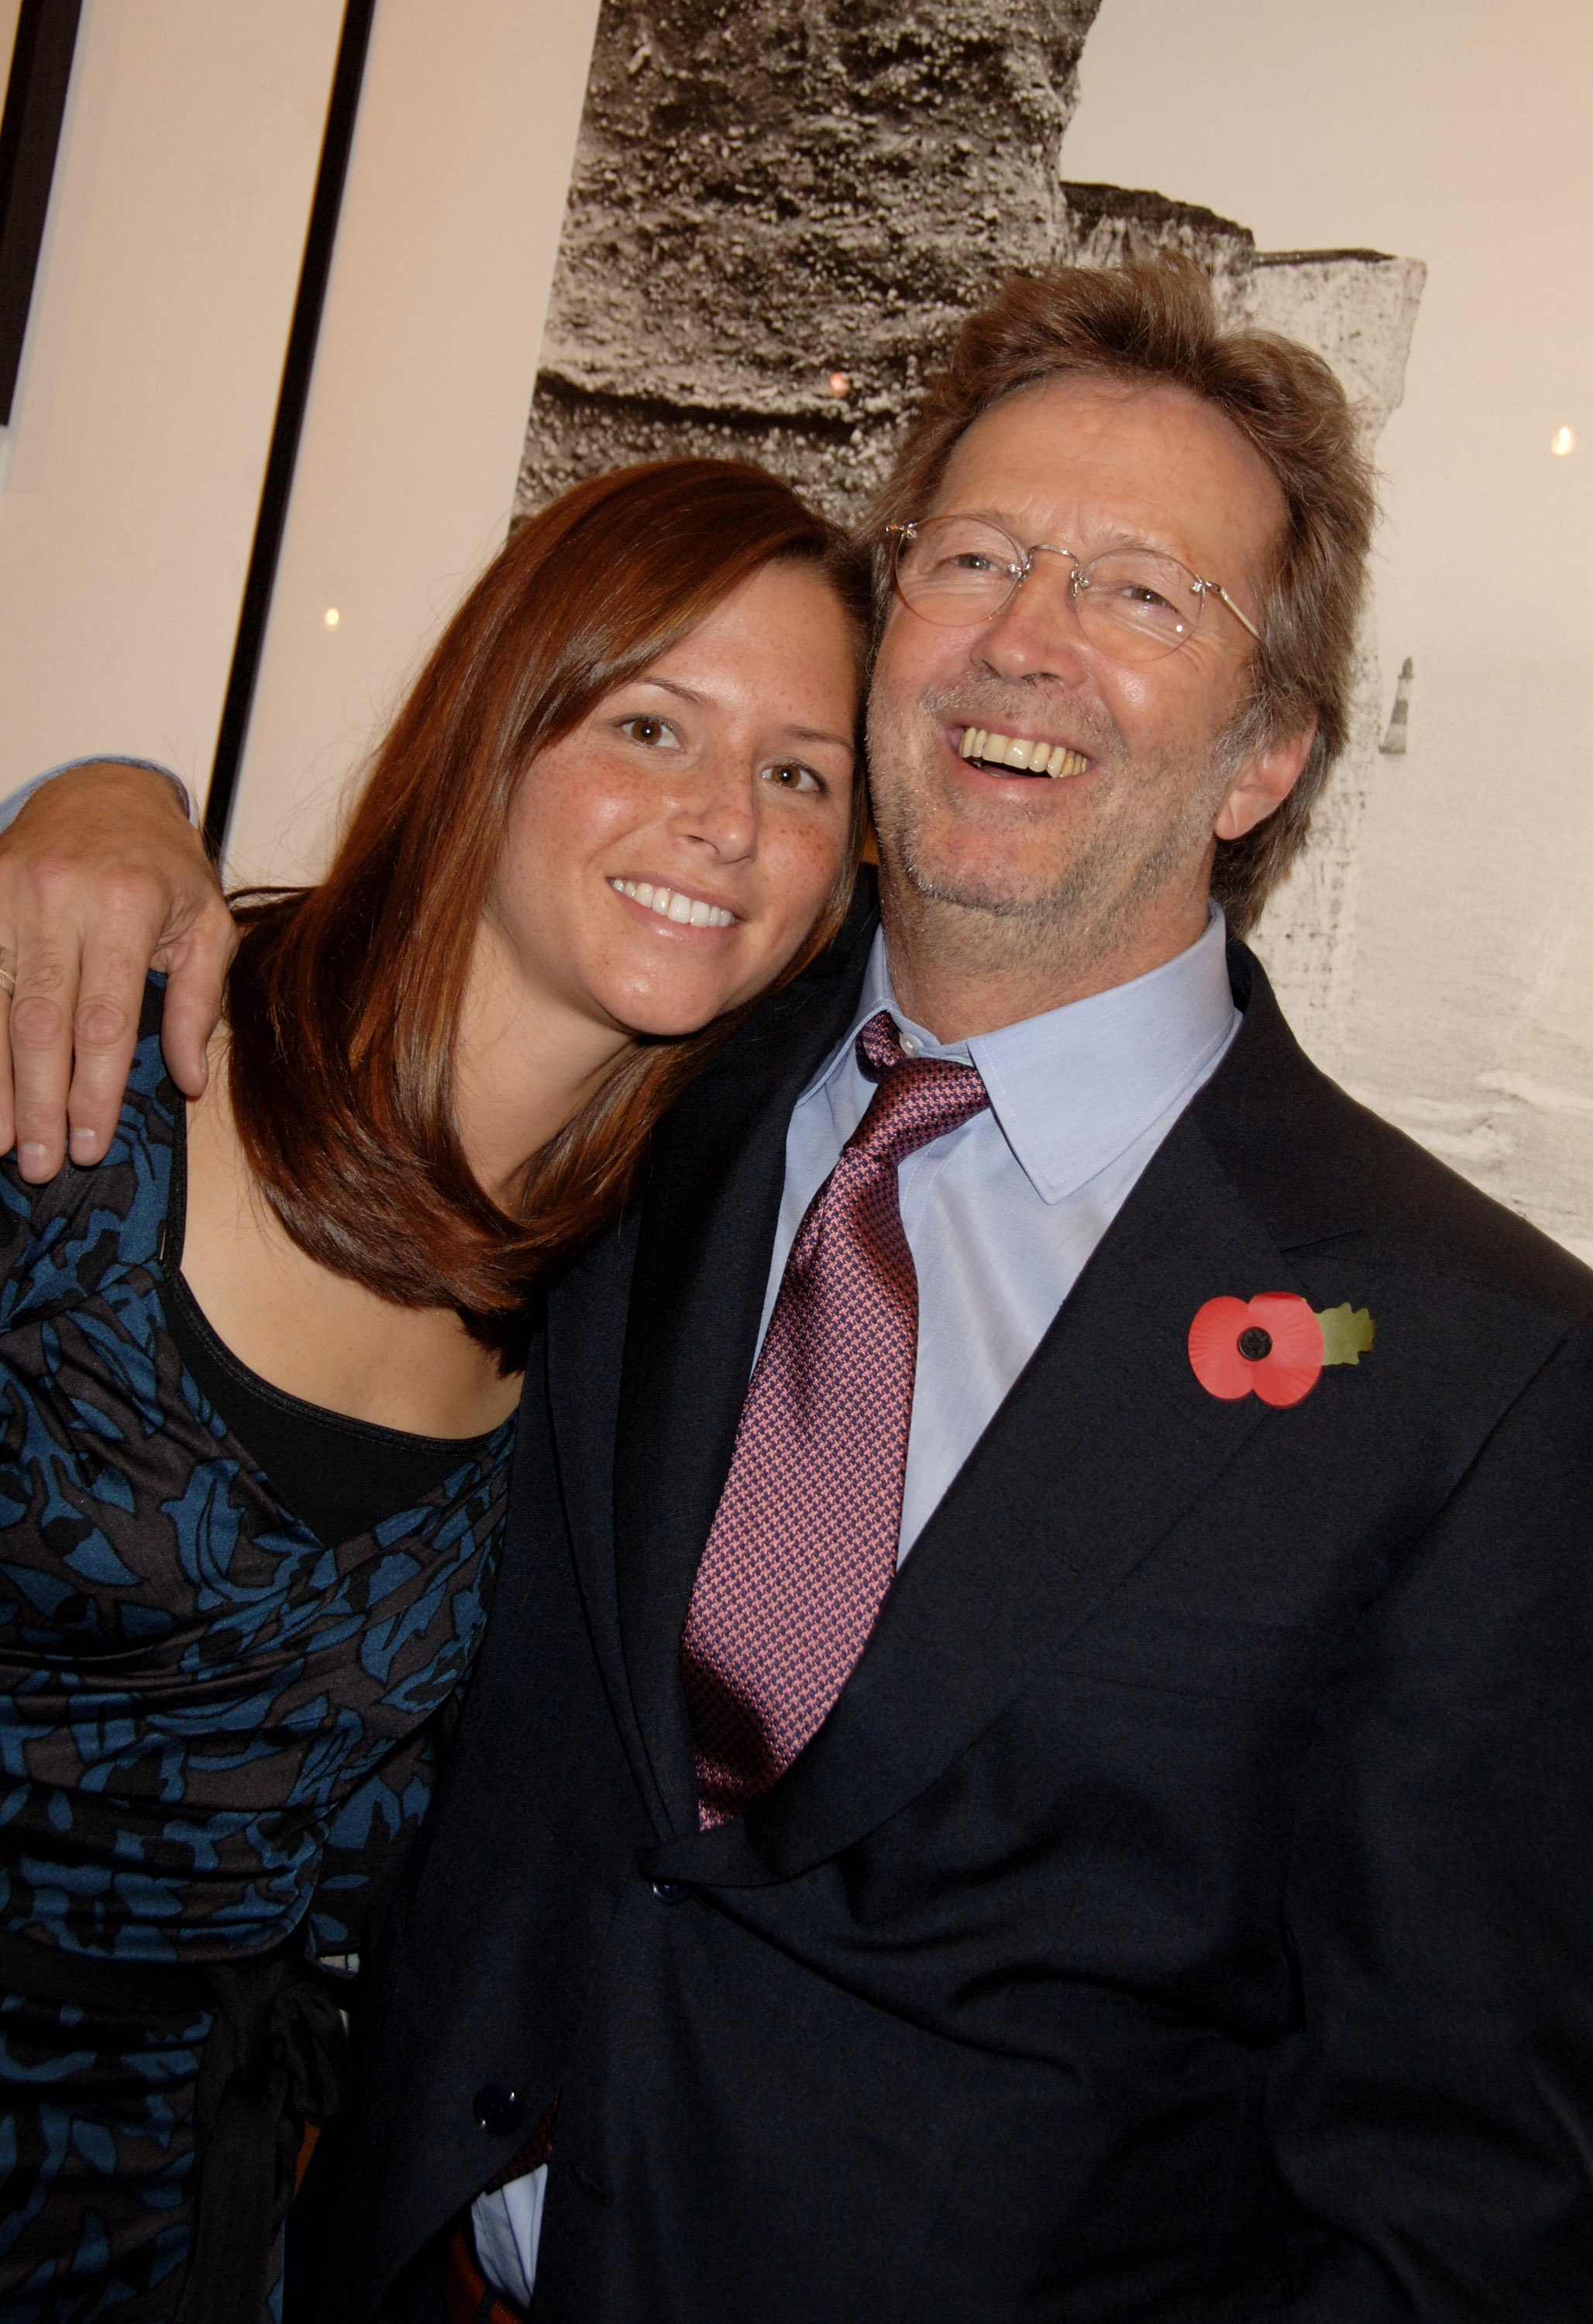 Eric Clapton and Melia McEnery  celebrating his book "Eric Clapton: The Autobiography" on November 1, 2007, in London, England | Source: Getty Images